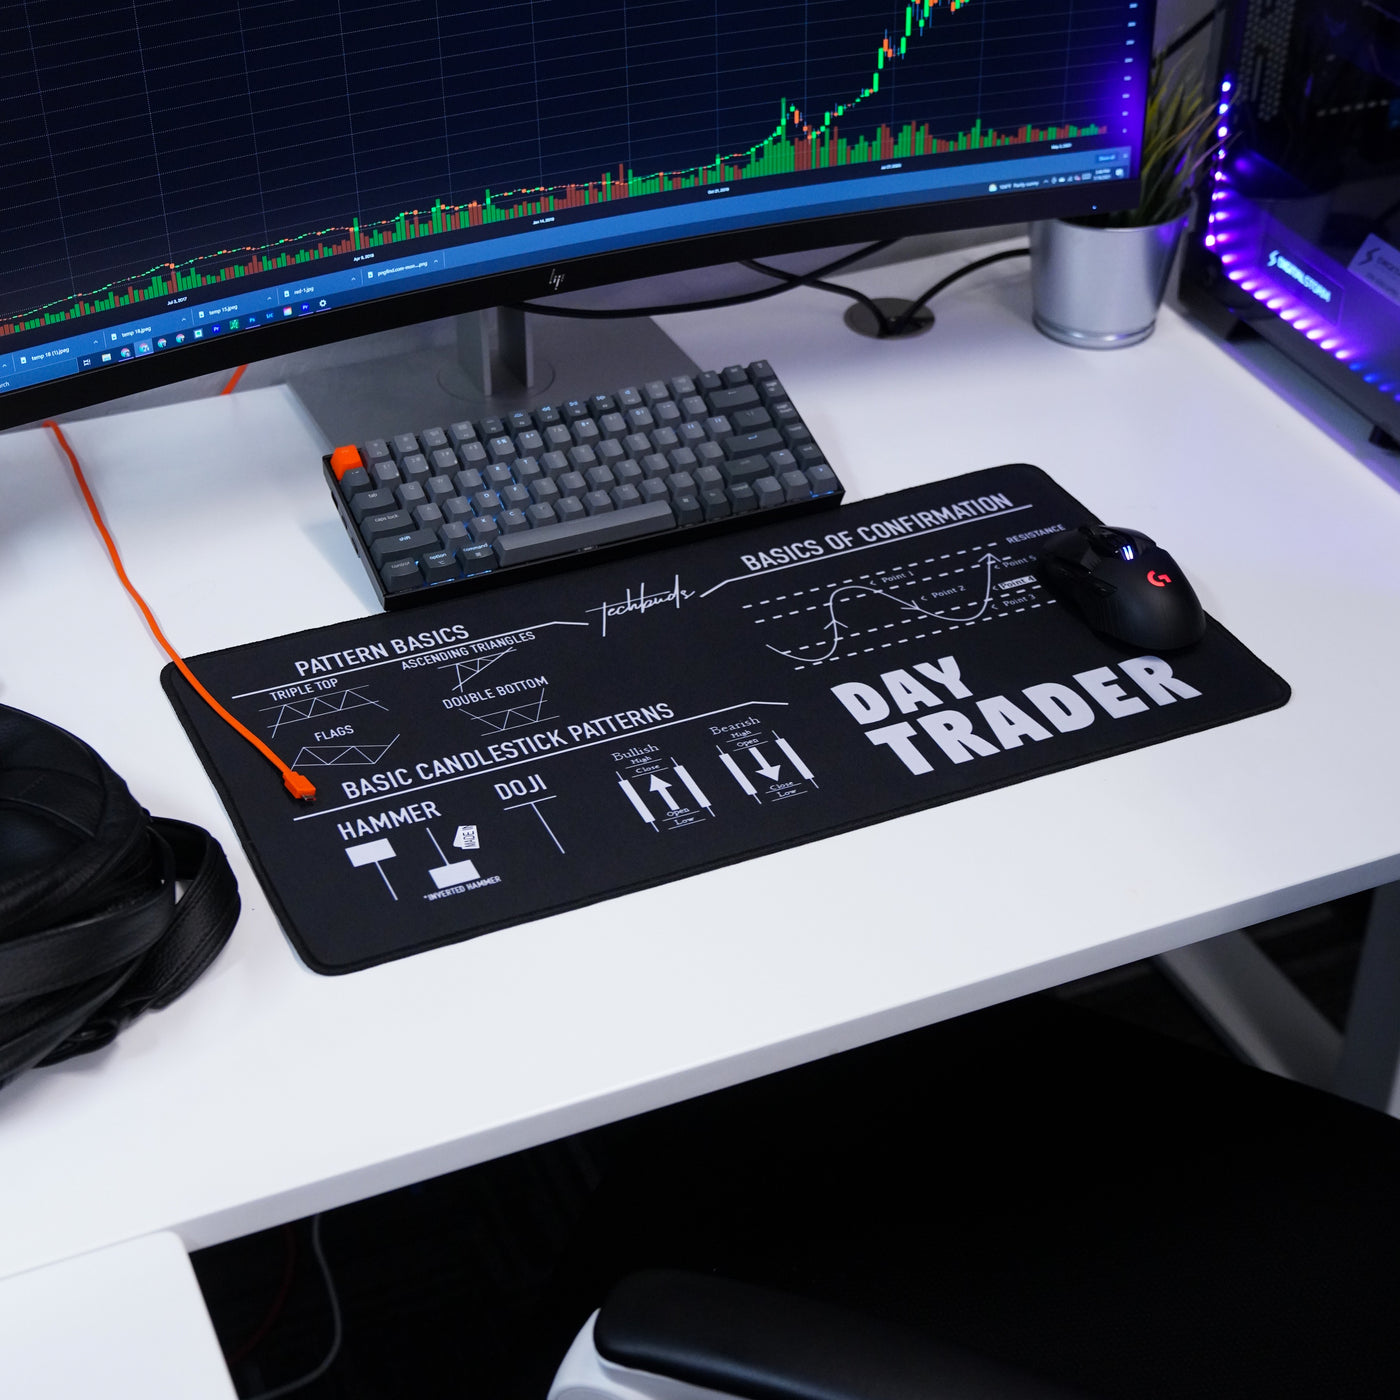 "Day Trader" Mouse Pad